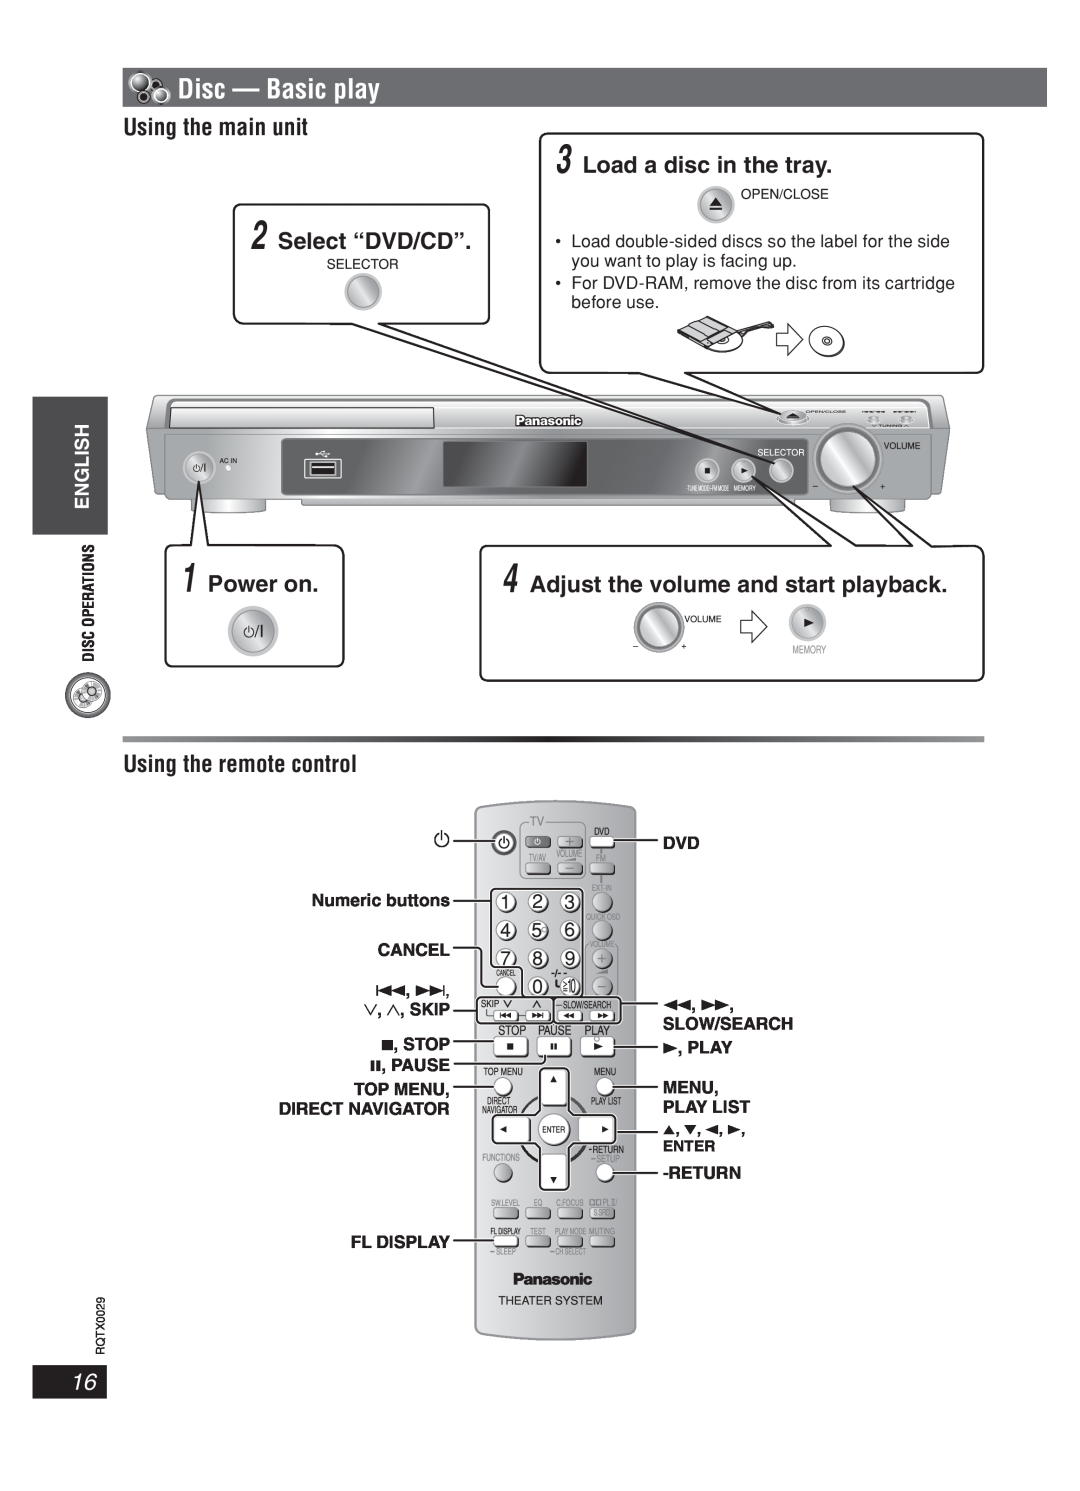 Panasonic sc-pt150 manual Disc - Basic play, Using the main unit 3 Load a disc in the tray, Using the remote control, 4, ¢ 